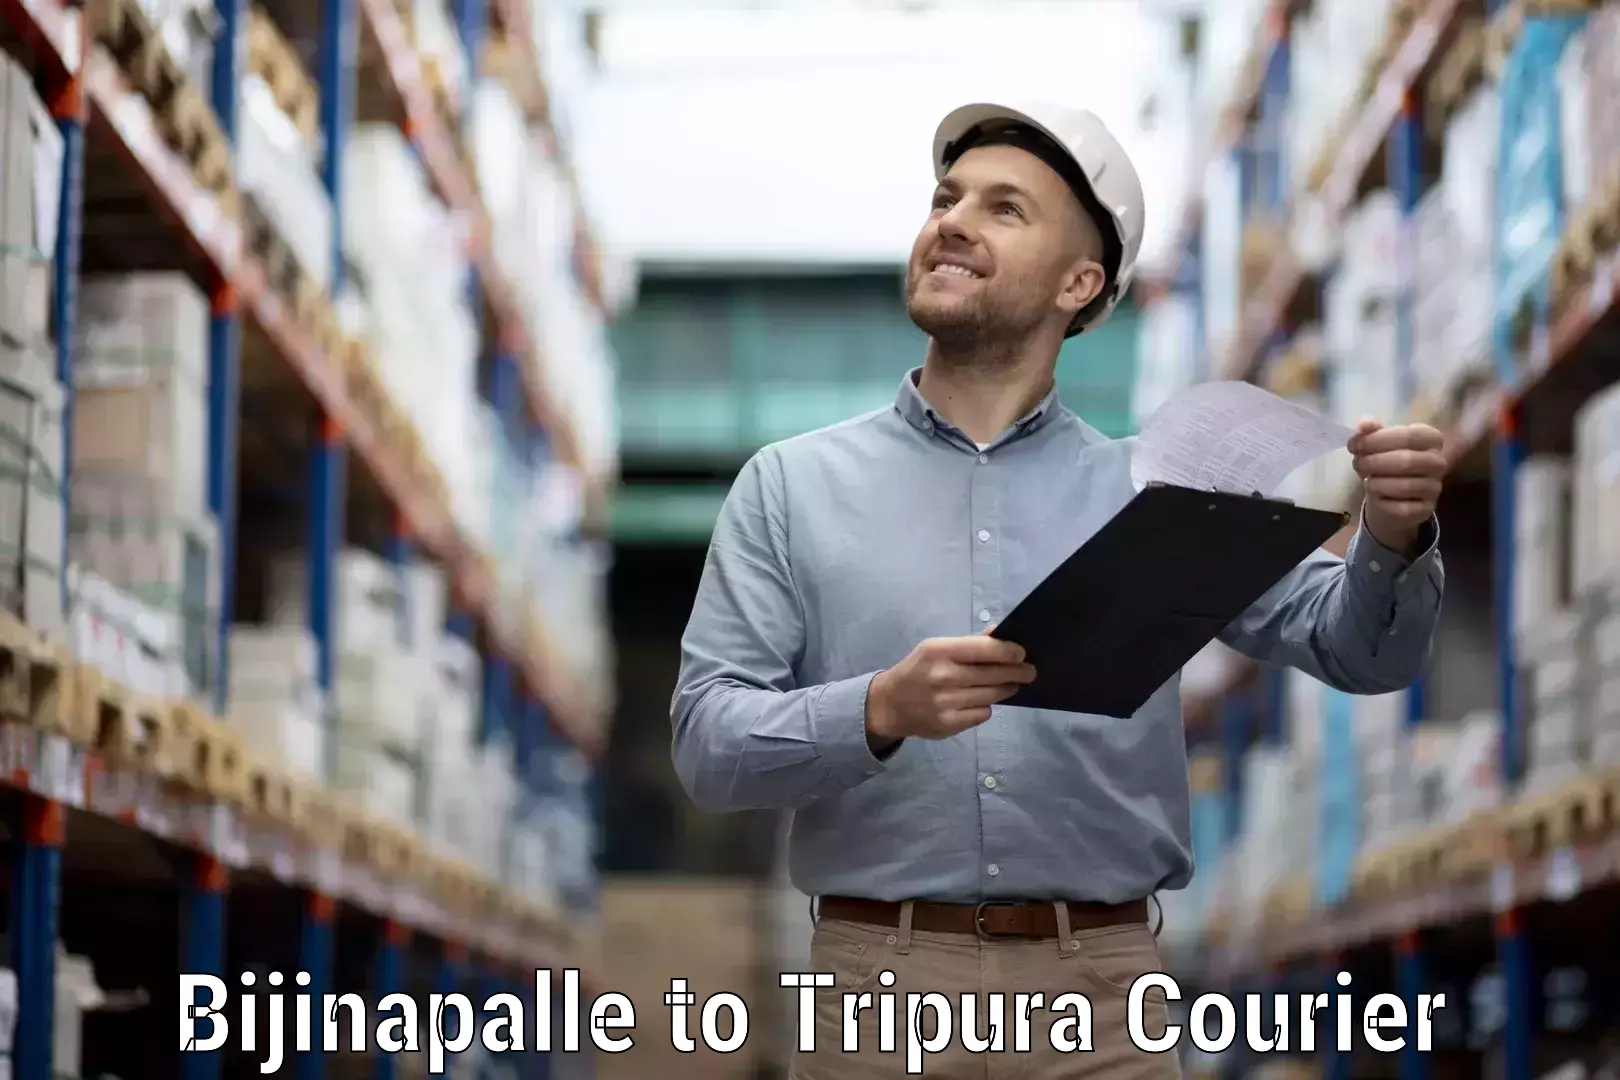 Optimized shipping services Bijinapalle to Udaipur Tripura